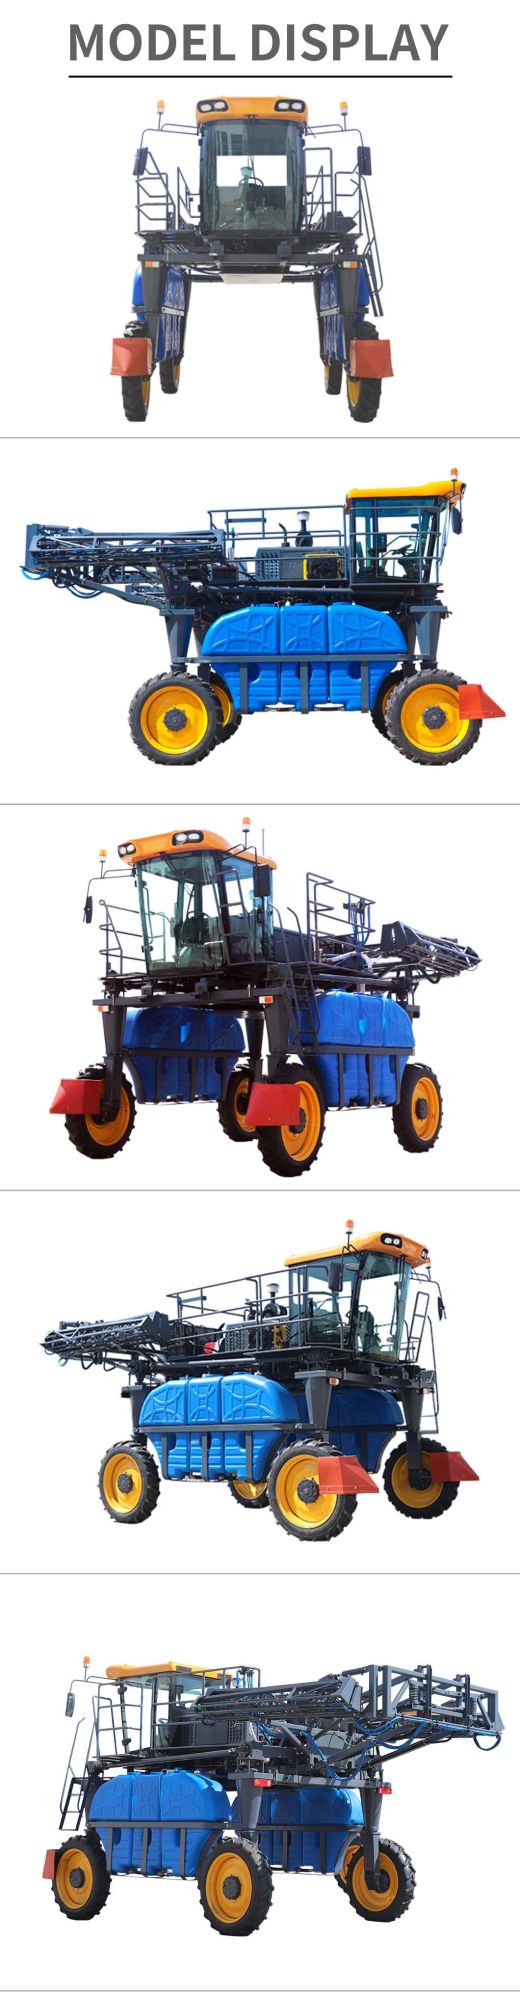 Pesticide Self Propelled Agriculture Farm Motorized Garden Corn Machinery Agricultural Boom Sprayer